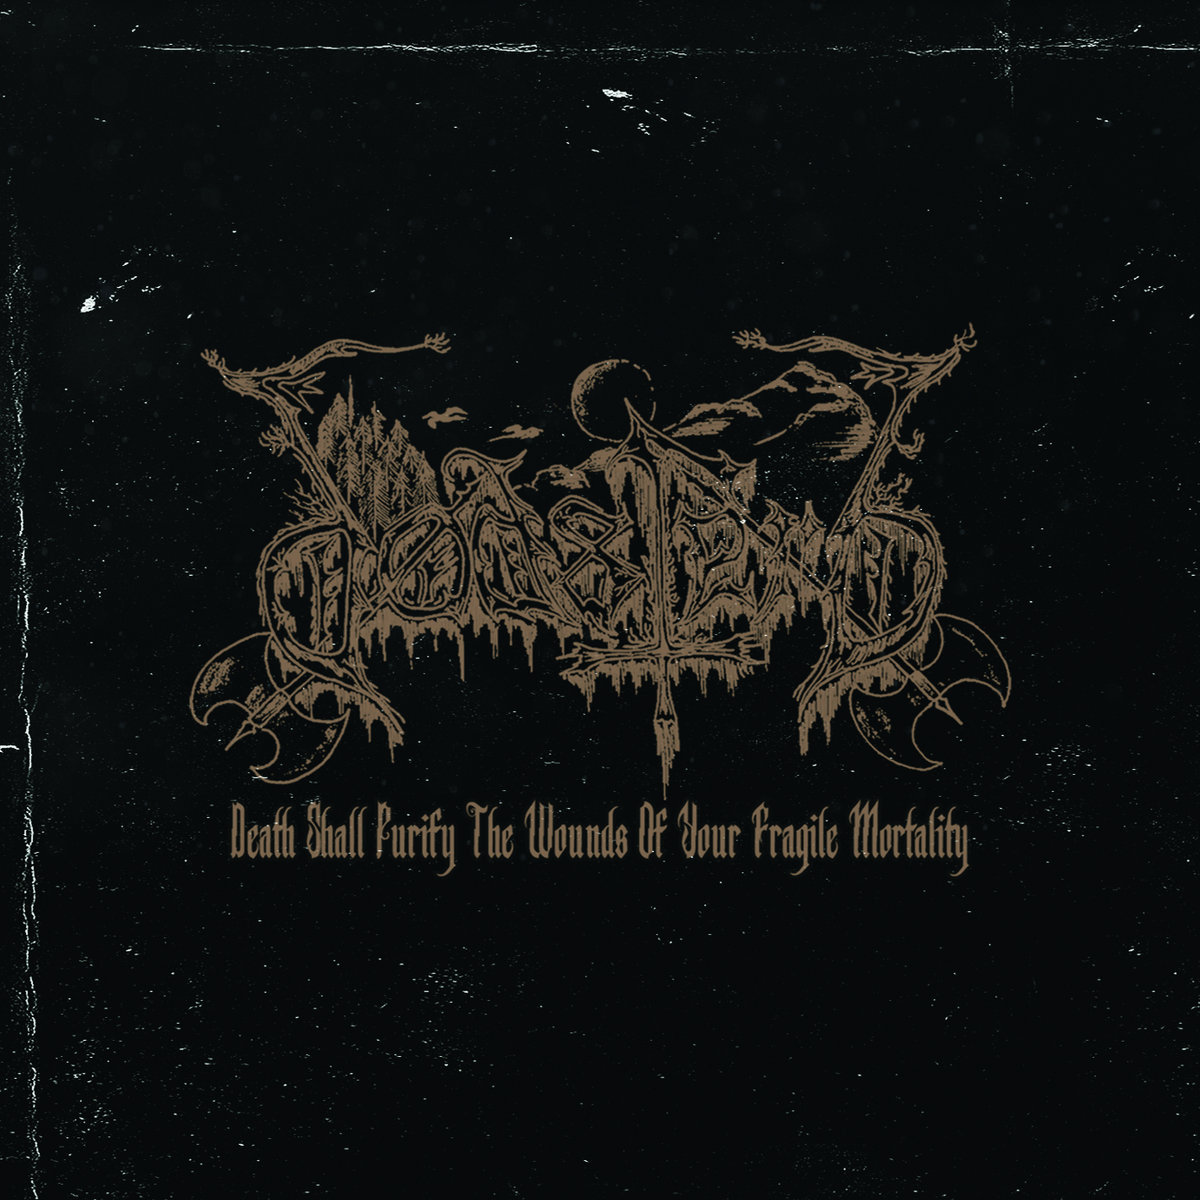 Dodsferd – Death shall Purify the Wounds of Your Fragile Mortality (Digi-CD+Sticker and Signature)